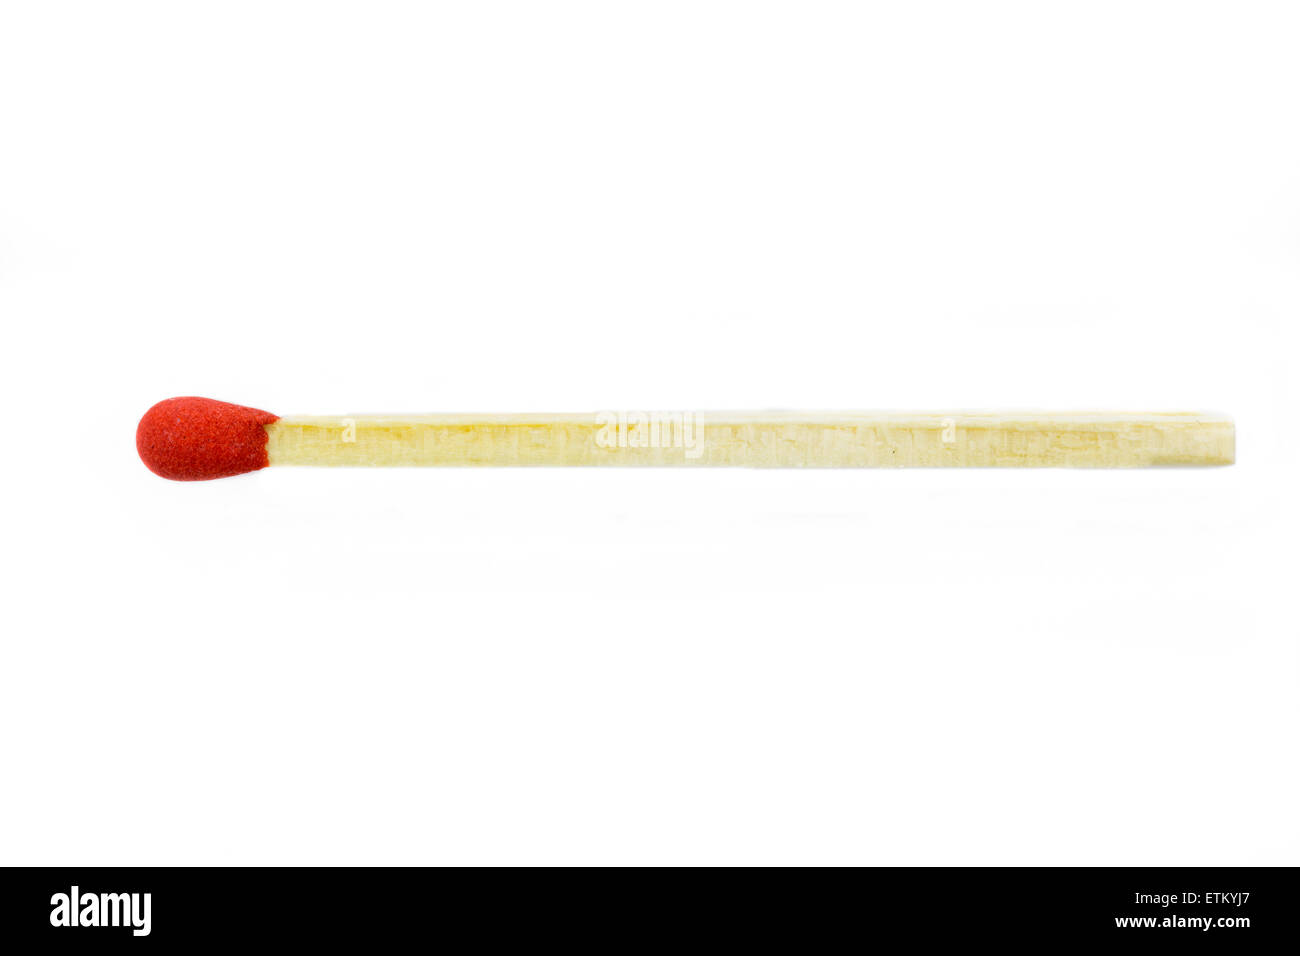 Match Stick on white background from top view (isolated) Stock Photo